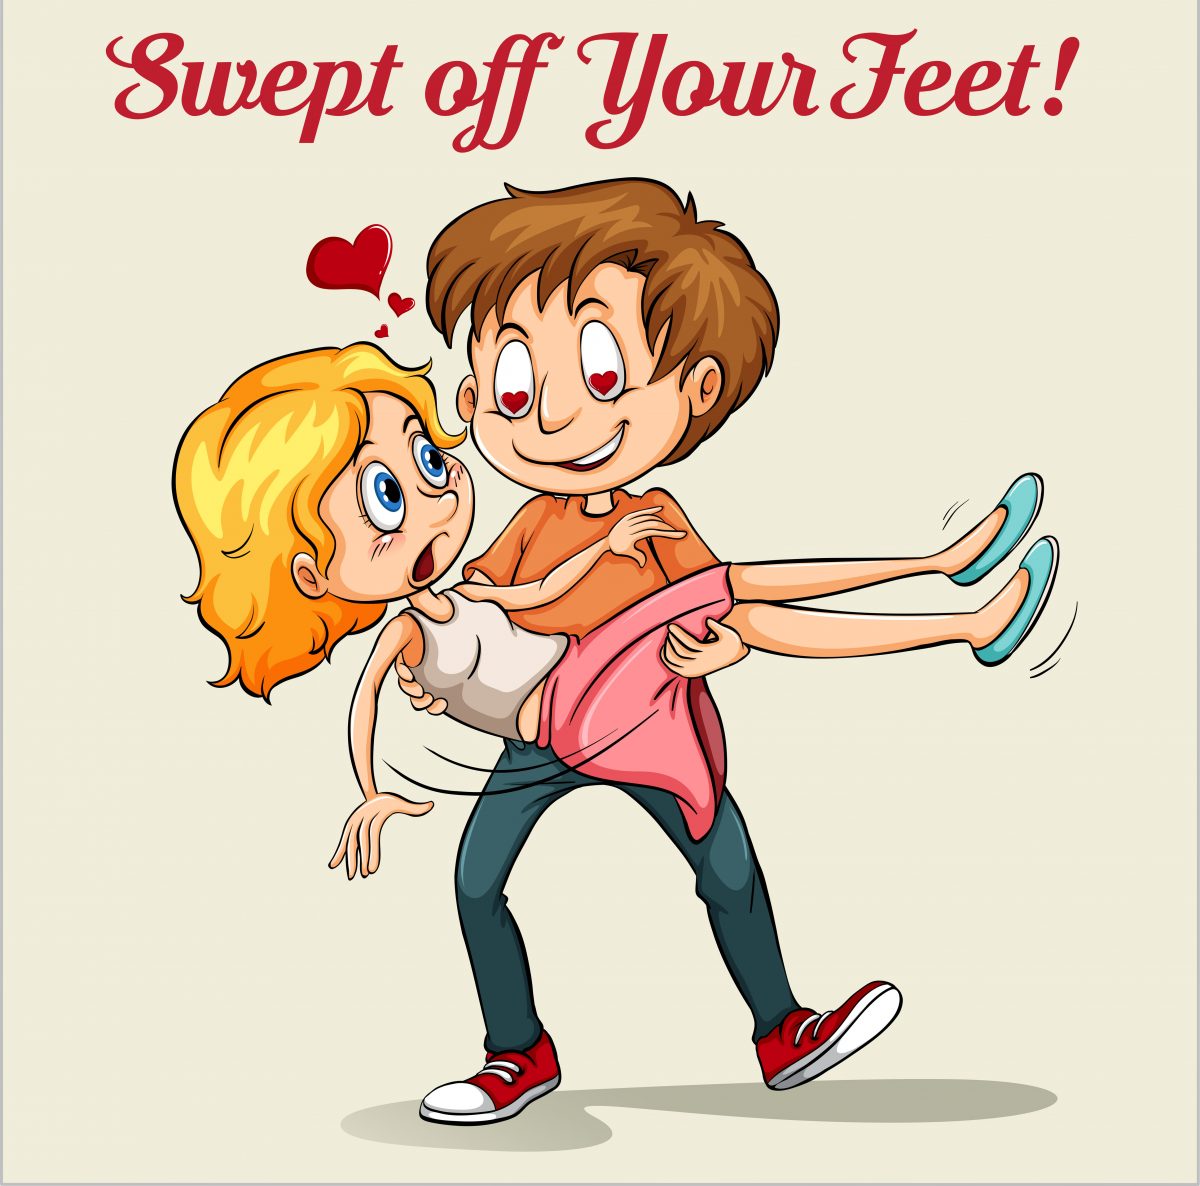 Swept off your feet